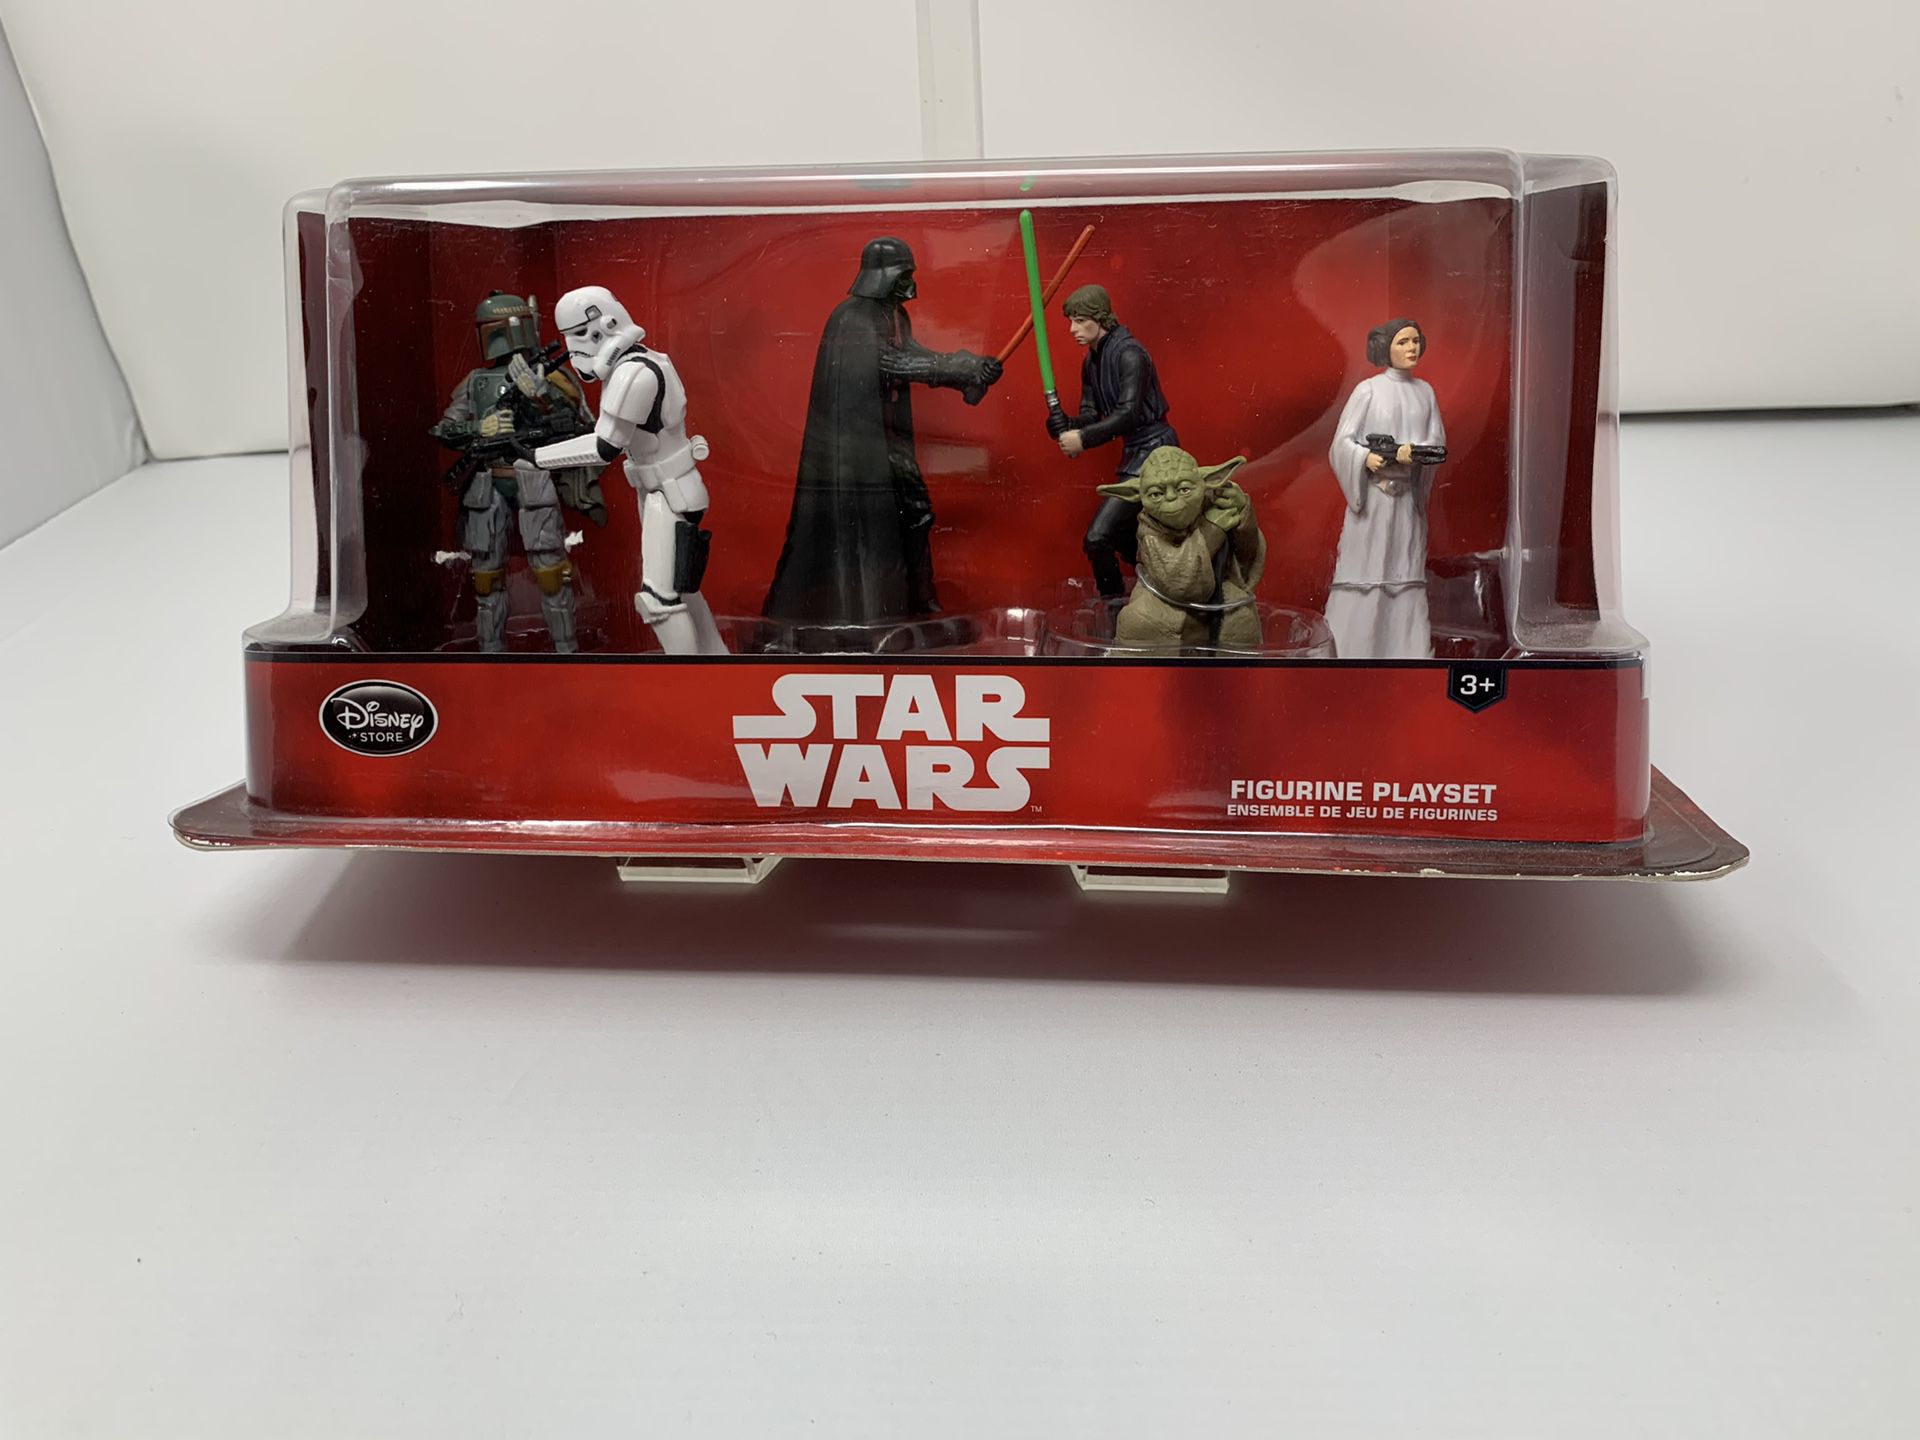 Disney Store Exclusive Star Wars Figurine Playset (Brand New)[Your Choice of 1]